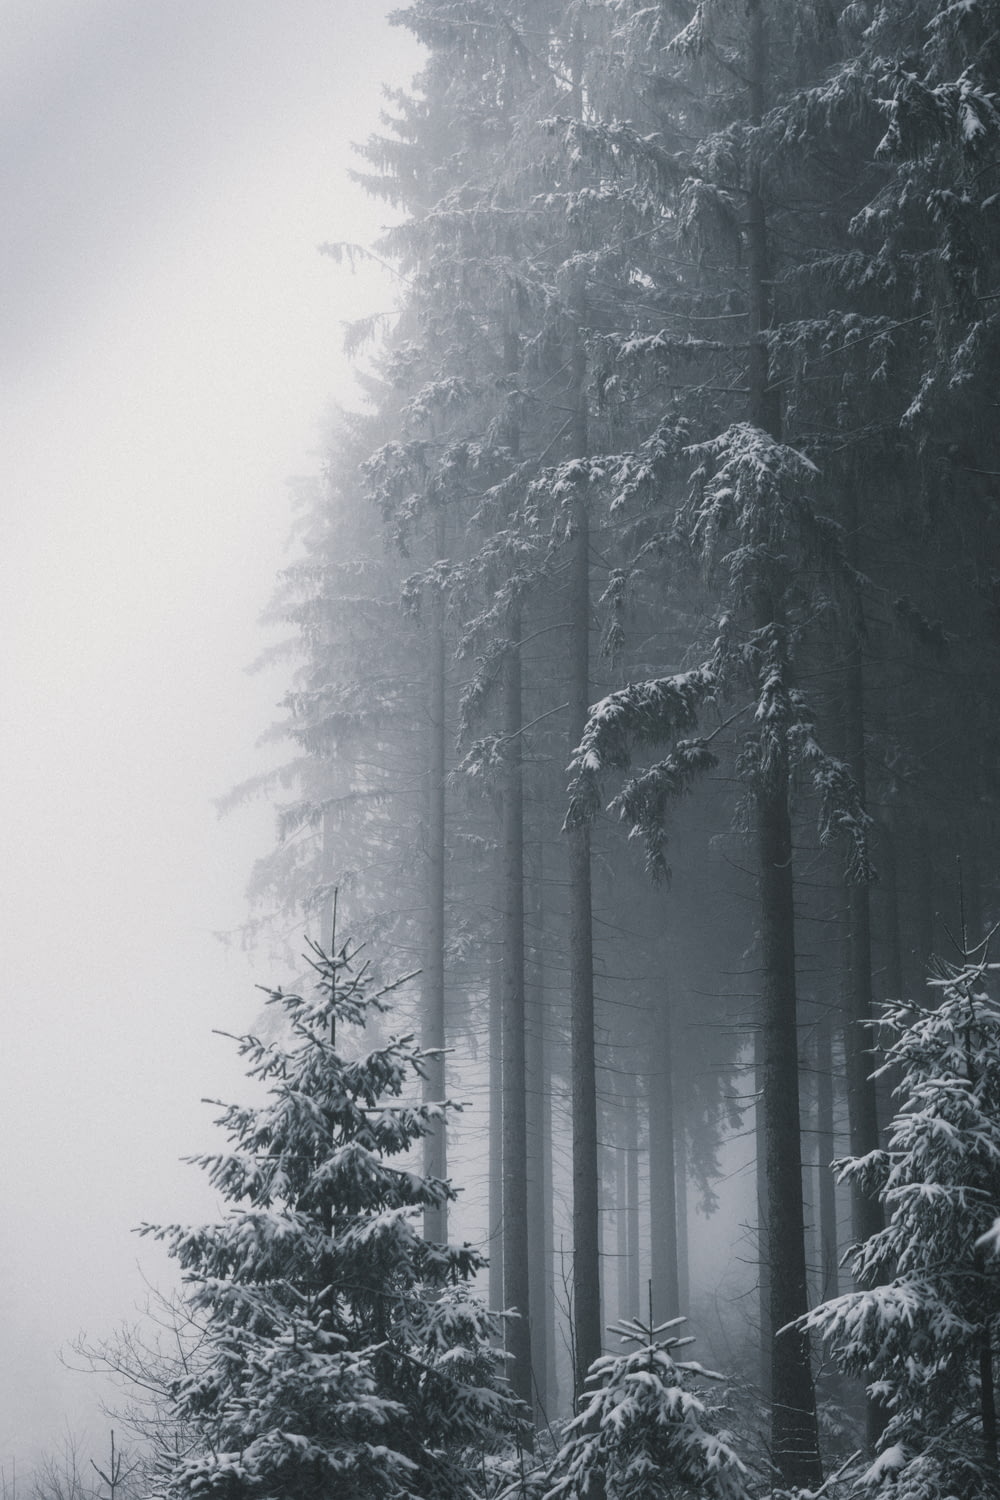 a forest filled with lots of tall trees covered in snow